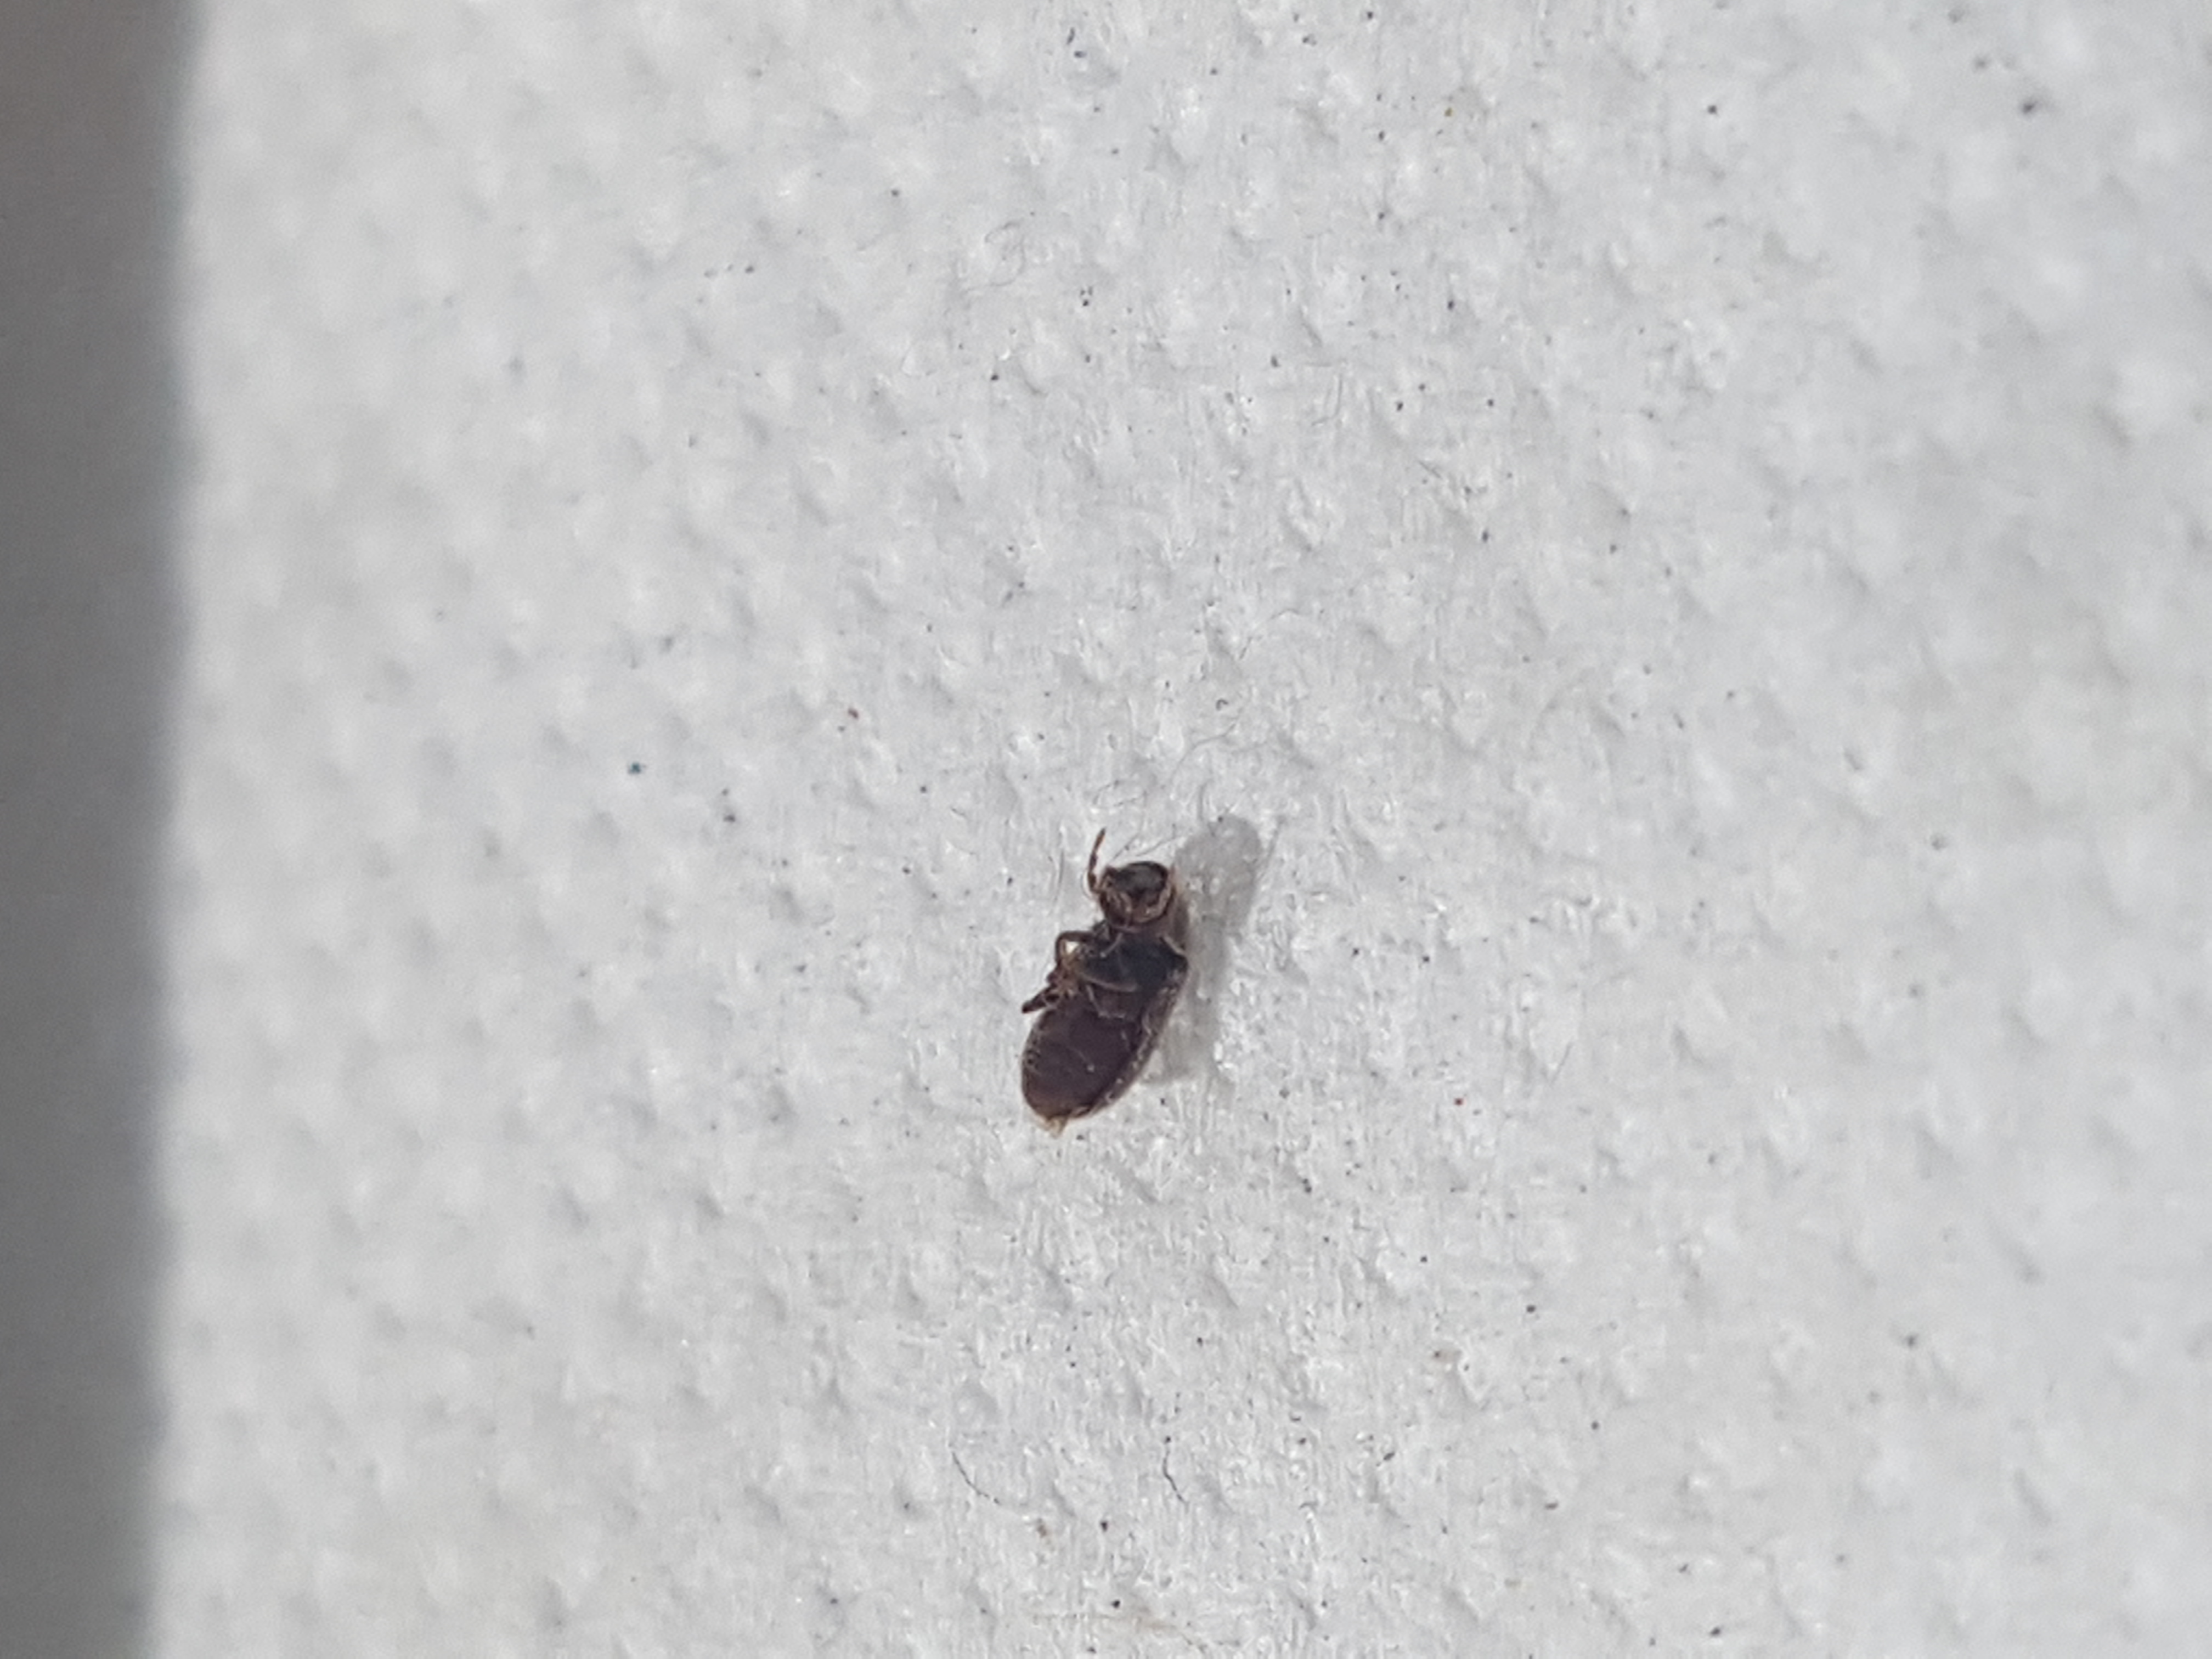 Natureplus Please Help Id These Small Black Flying Bugs On